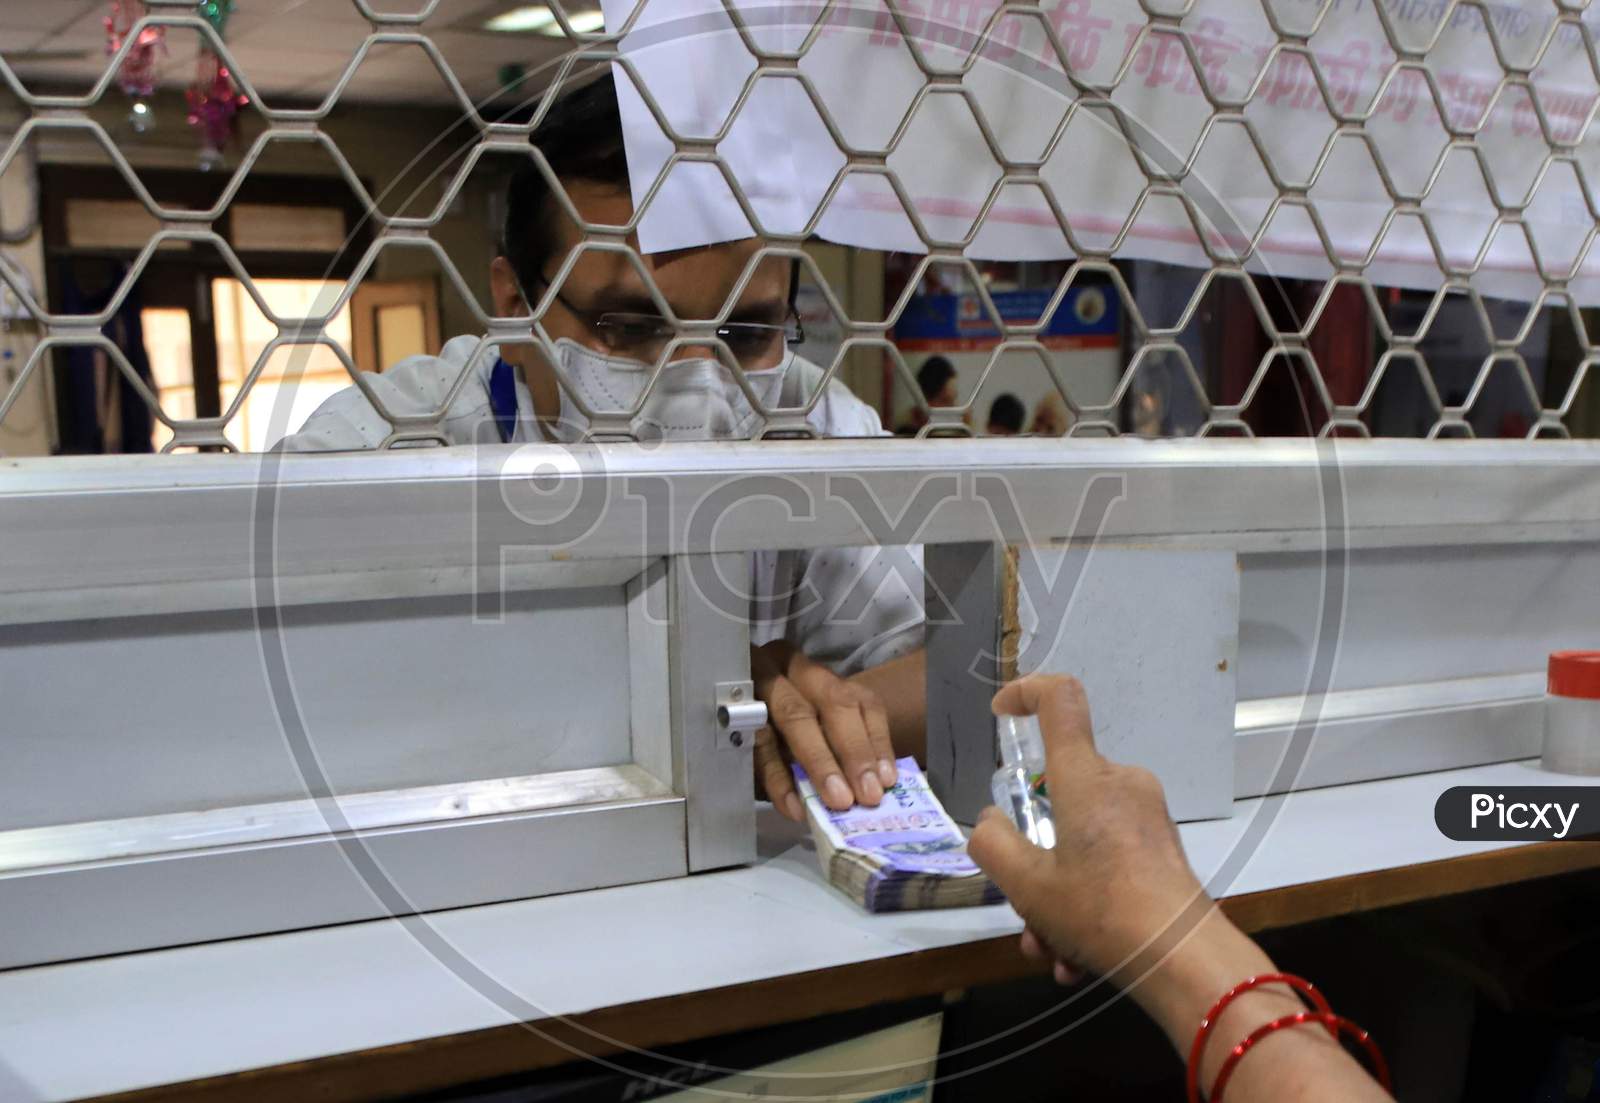 A Bank Employee Sanitizes Indian Currency Inside A Bank During A Nationwide Lock down To Slow The Spreading Of The Corona virus Disease (Covid-19), In Prayagraj, April, 16, 2020.